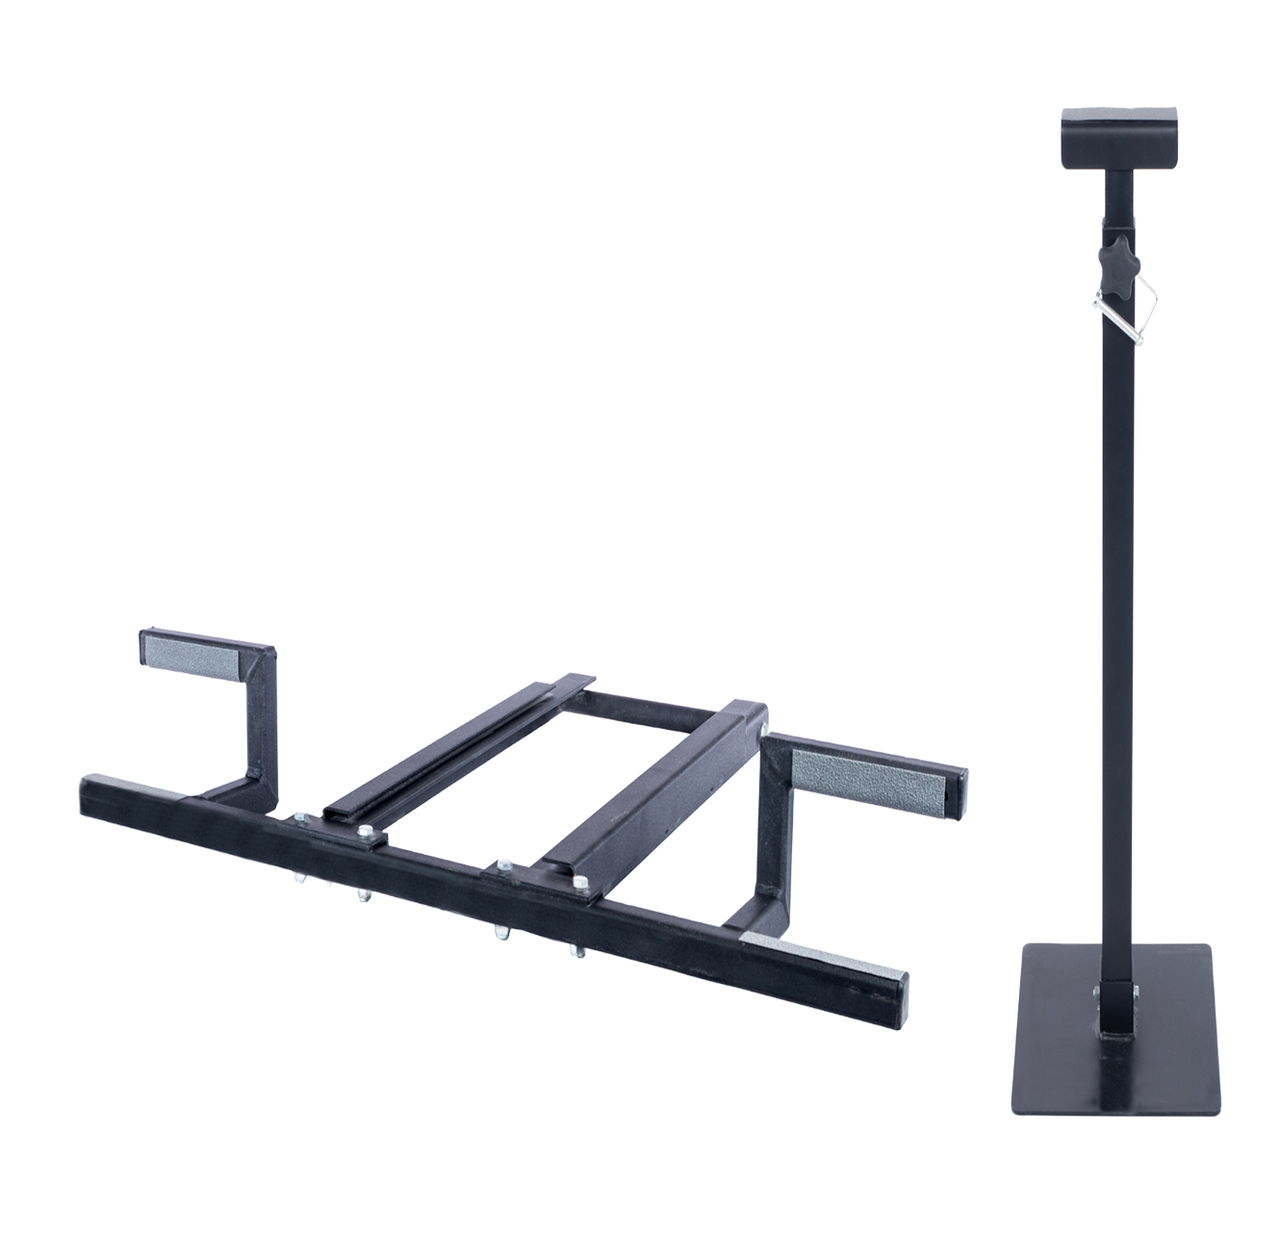 Lift King Stabilizer Kit - Bed & box Removal